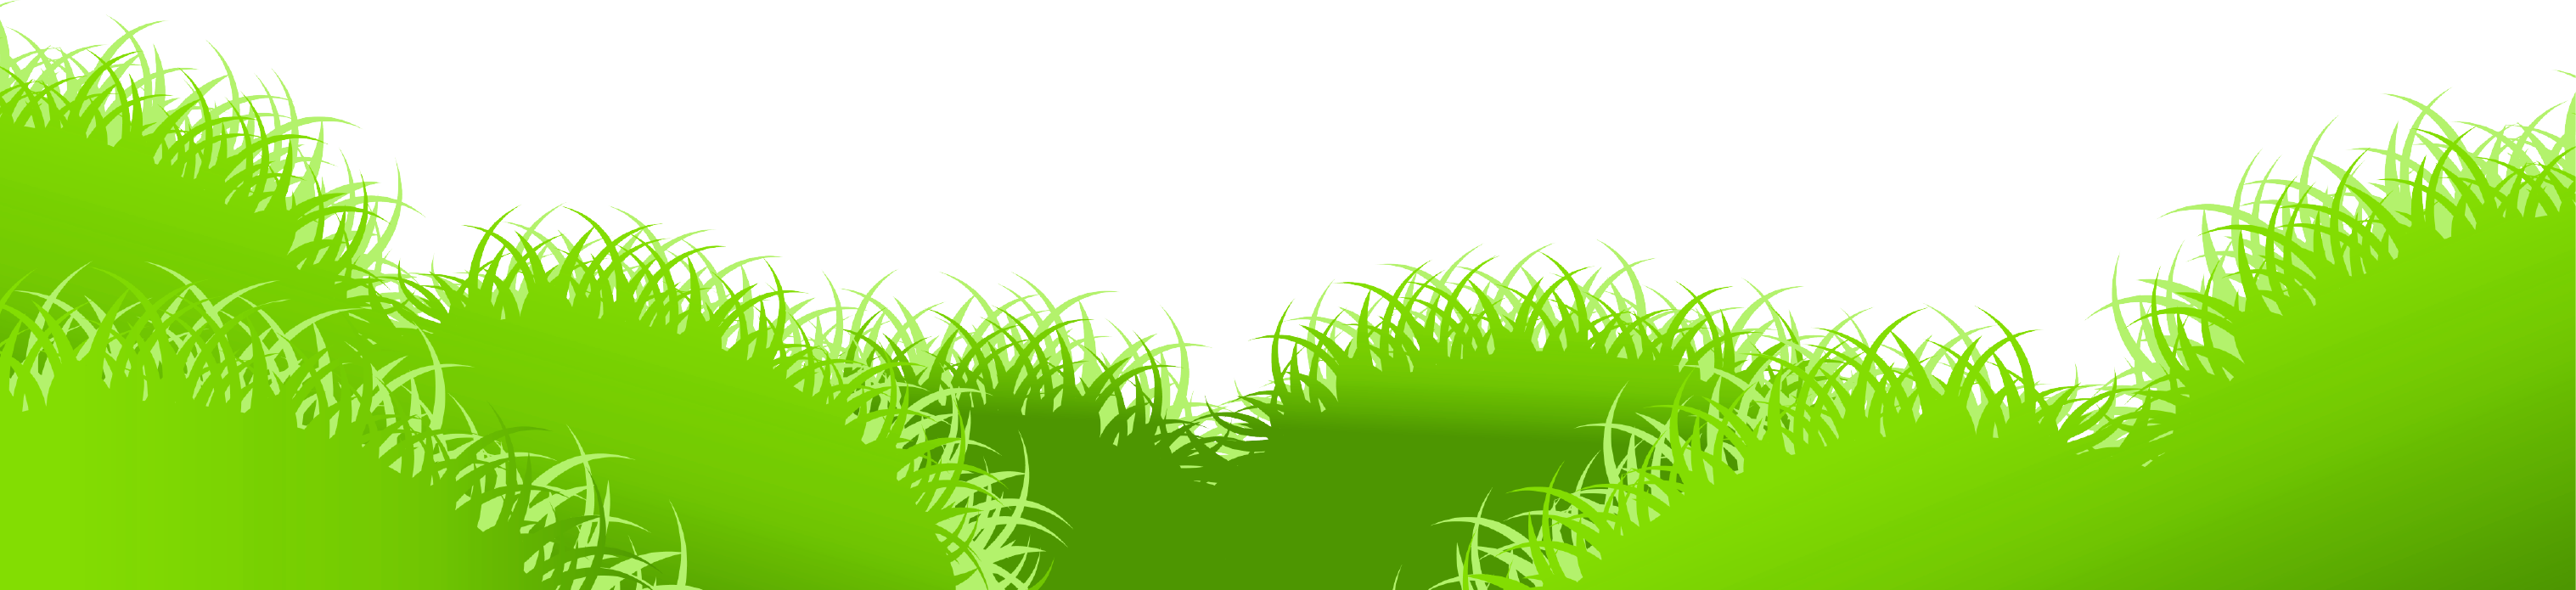 Free clip art grass clipart image 2 clipartcow